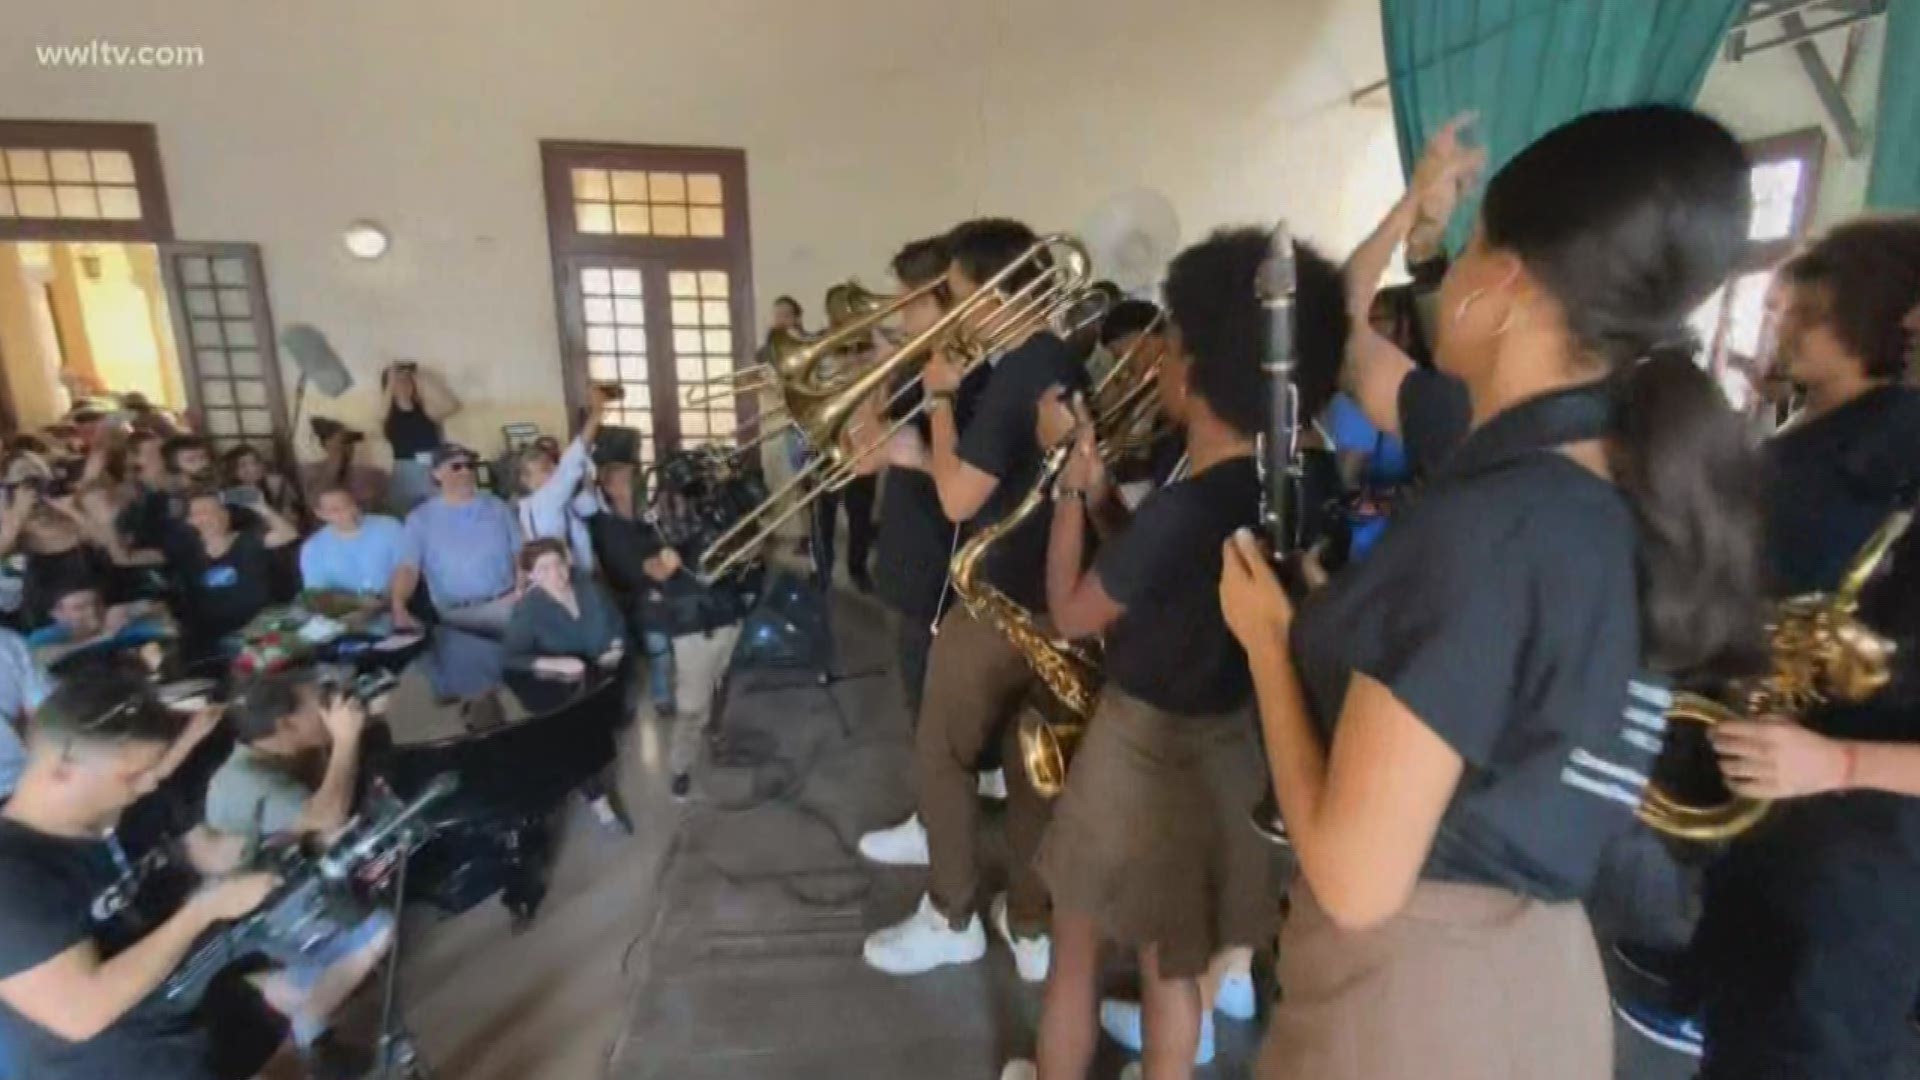 When a group of New Orleans musicians made the trip to Cuba, there was no need for an interpreter.